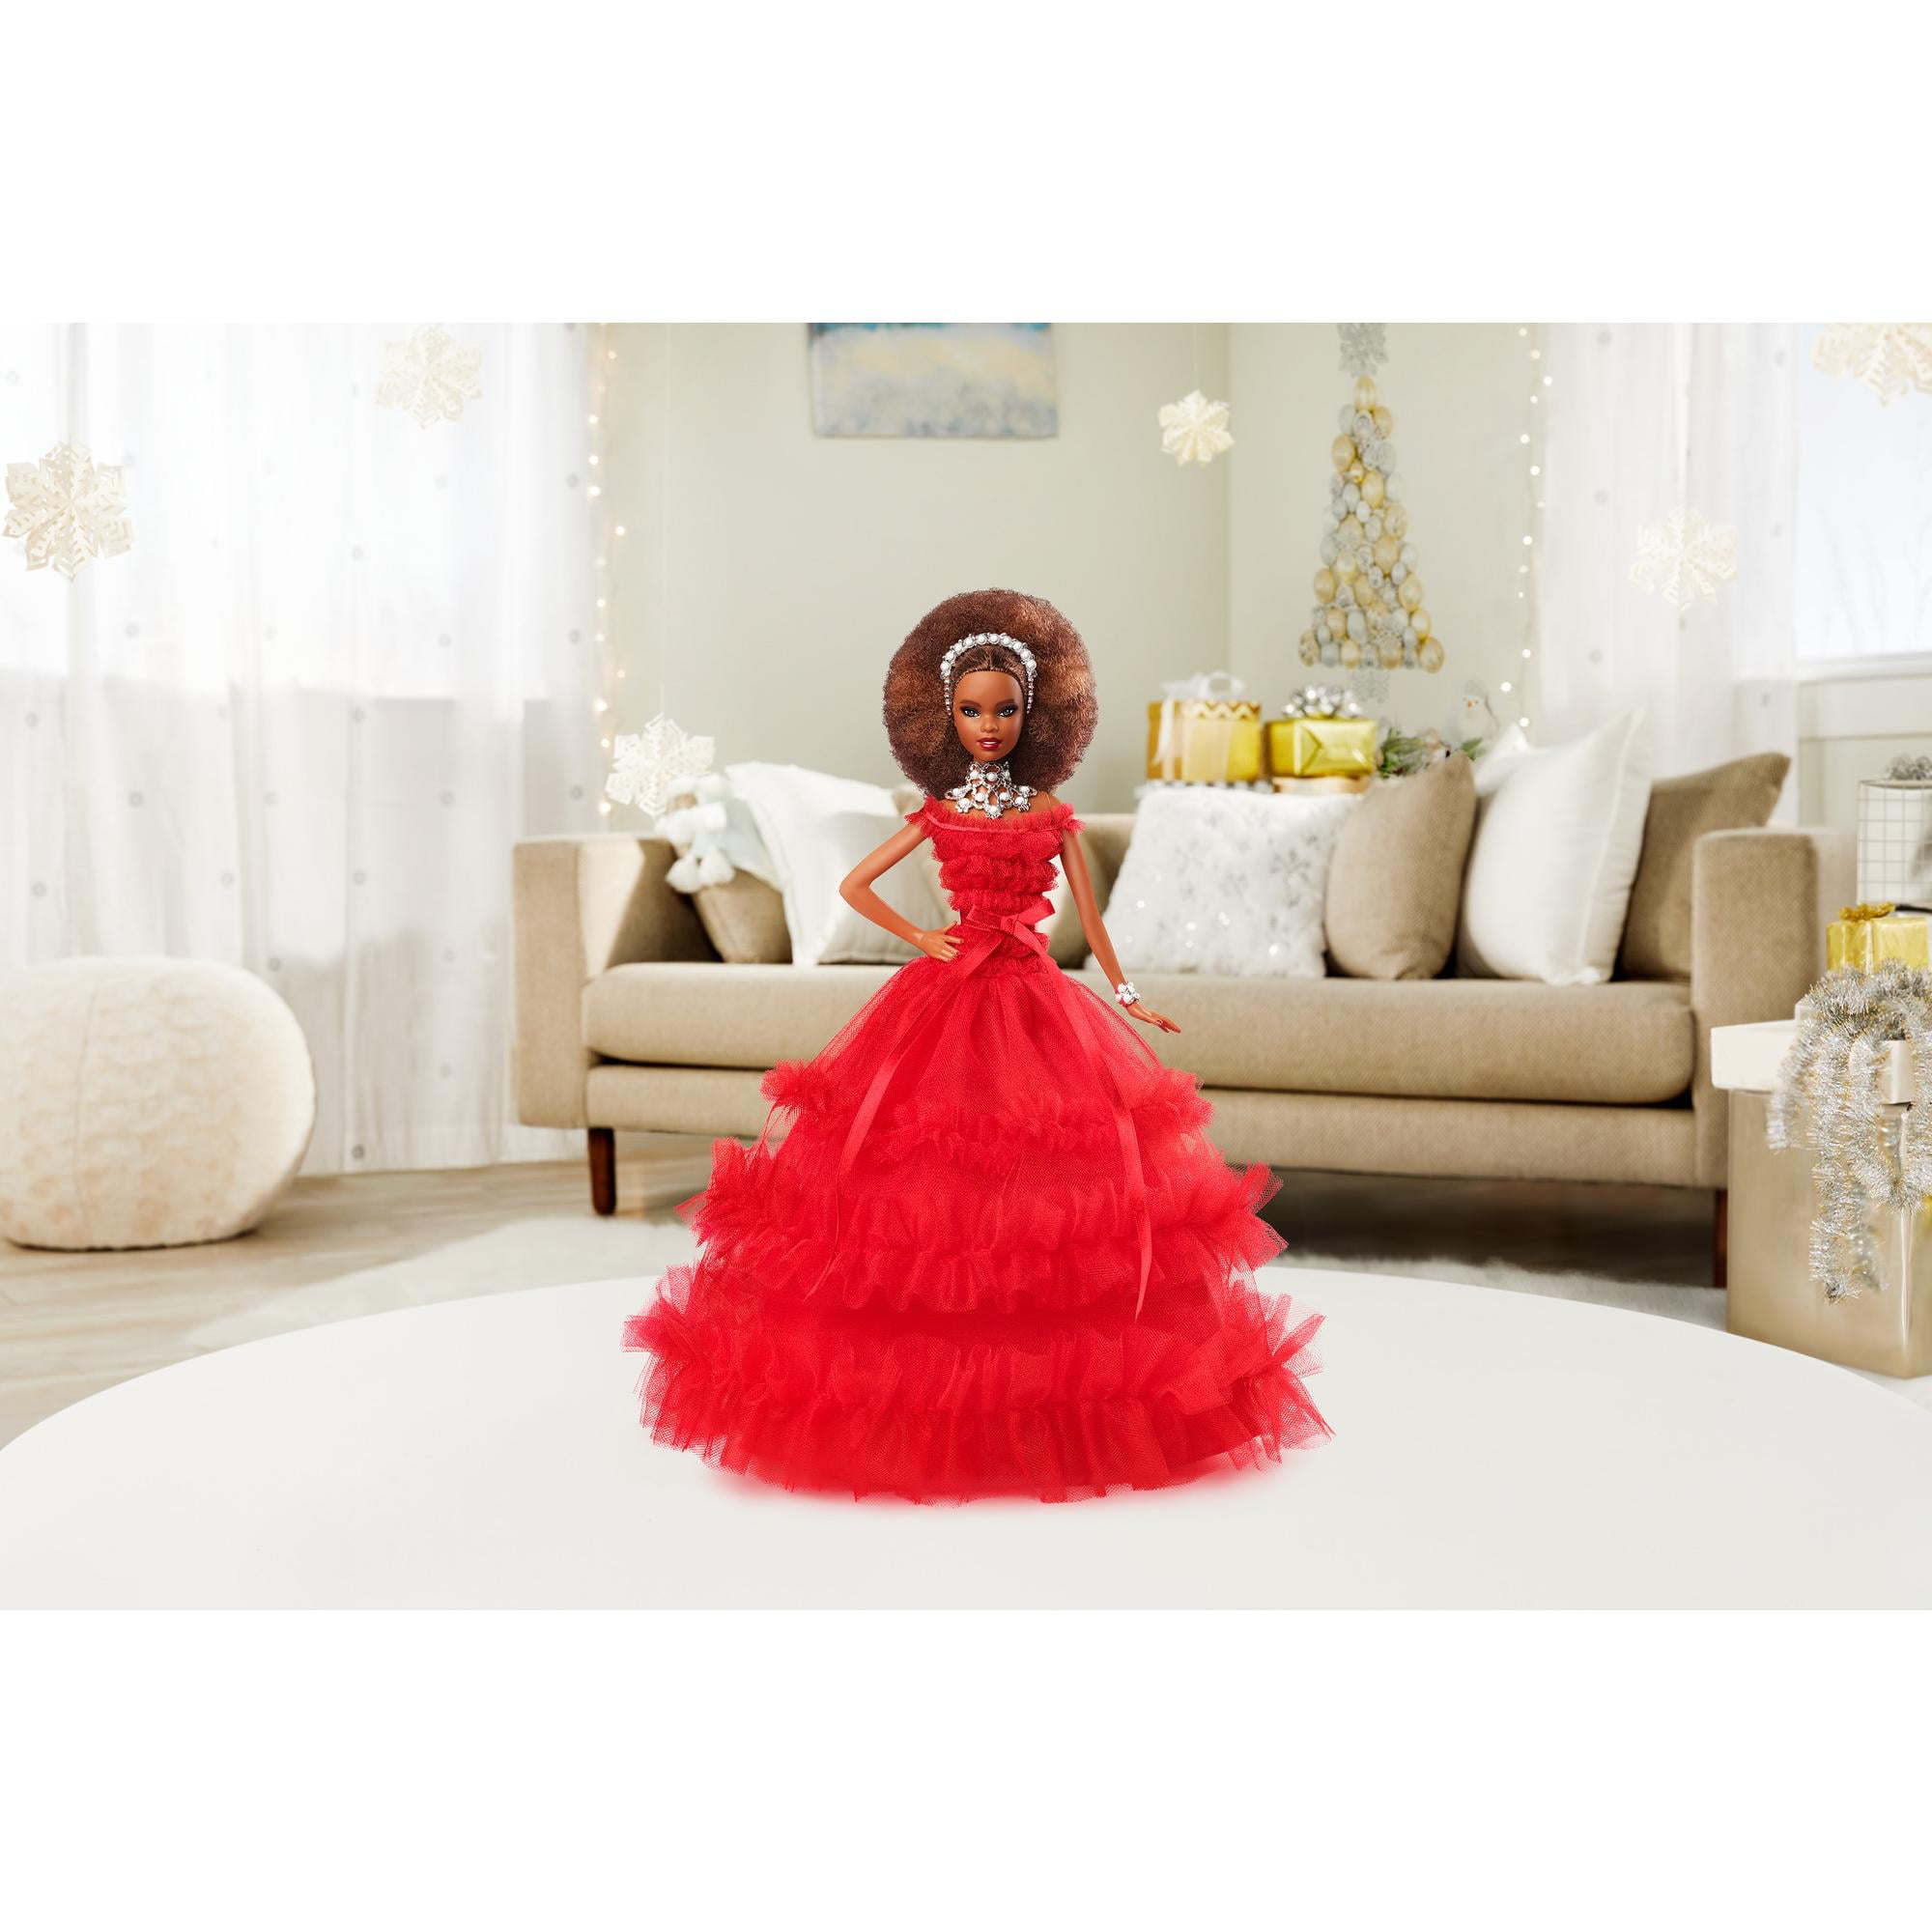 2018 Holiday Collector Barbie Signature Nikki Doll with Stand